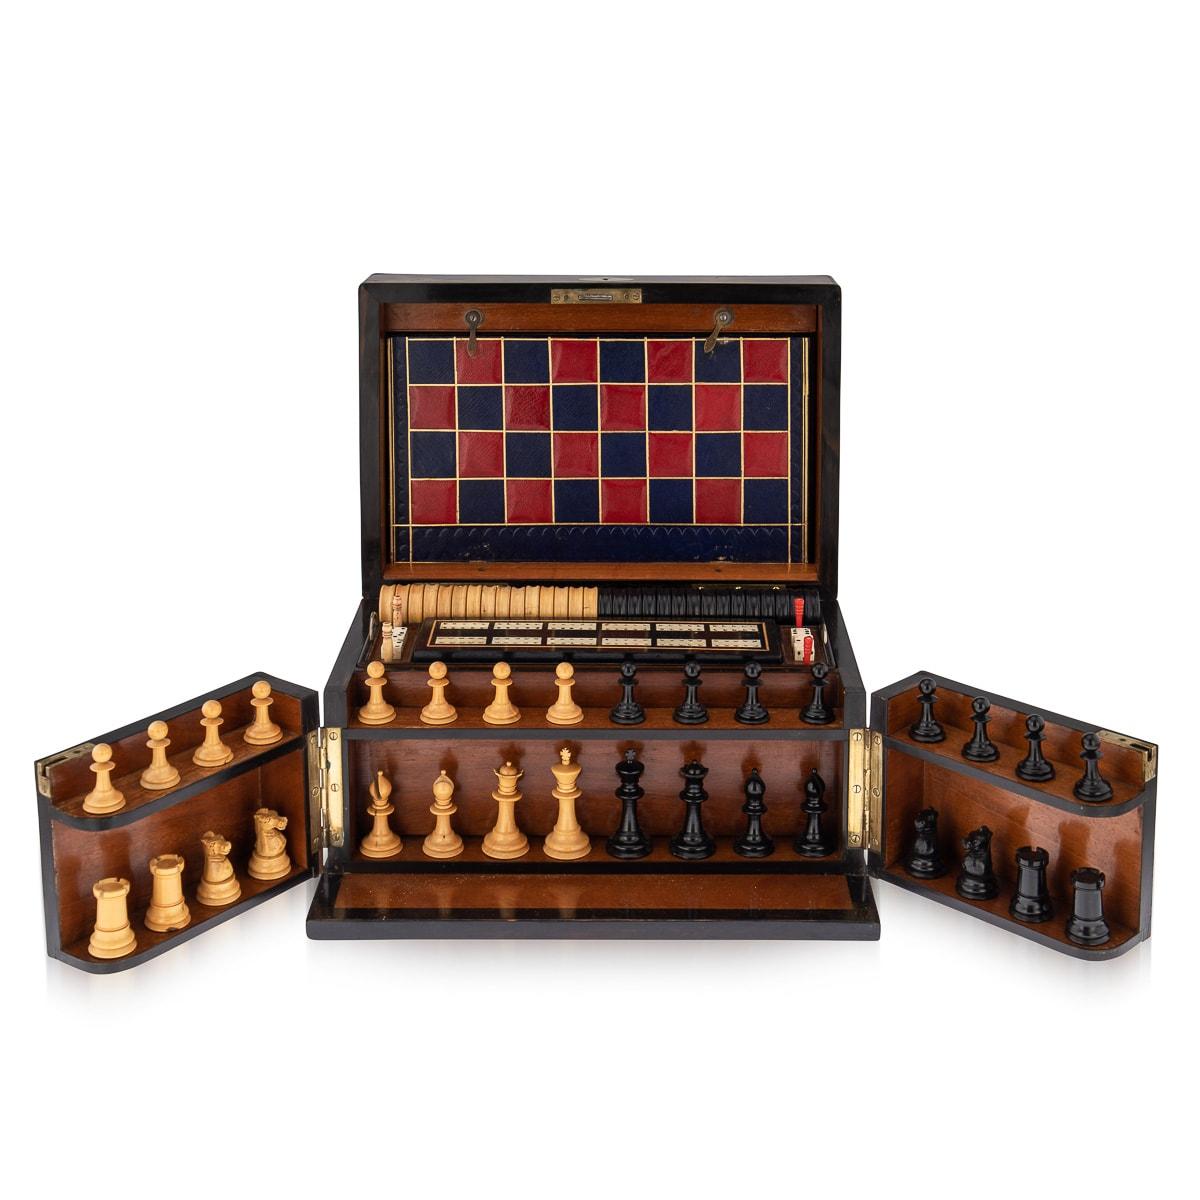 Antique late-19th century Victorian walnut cased games compendium, the interior comprising a chess set, draughts, dominoes, dice, cribbage board with markers, leather bound boards for games, playing cards, droughts counters, a dice shaker. A superb